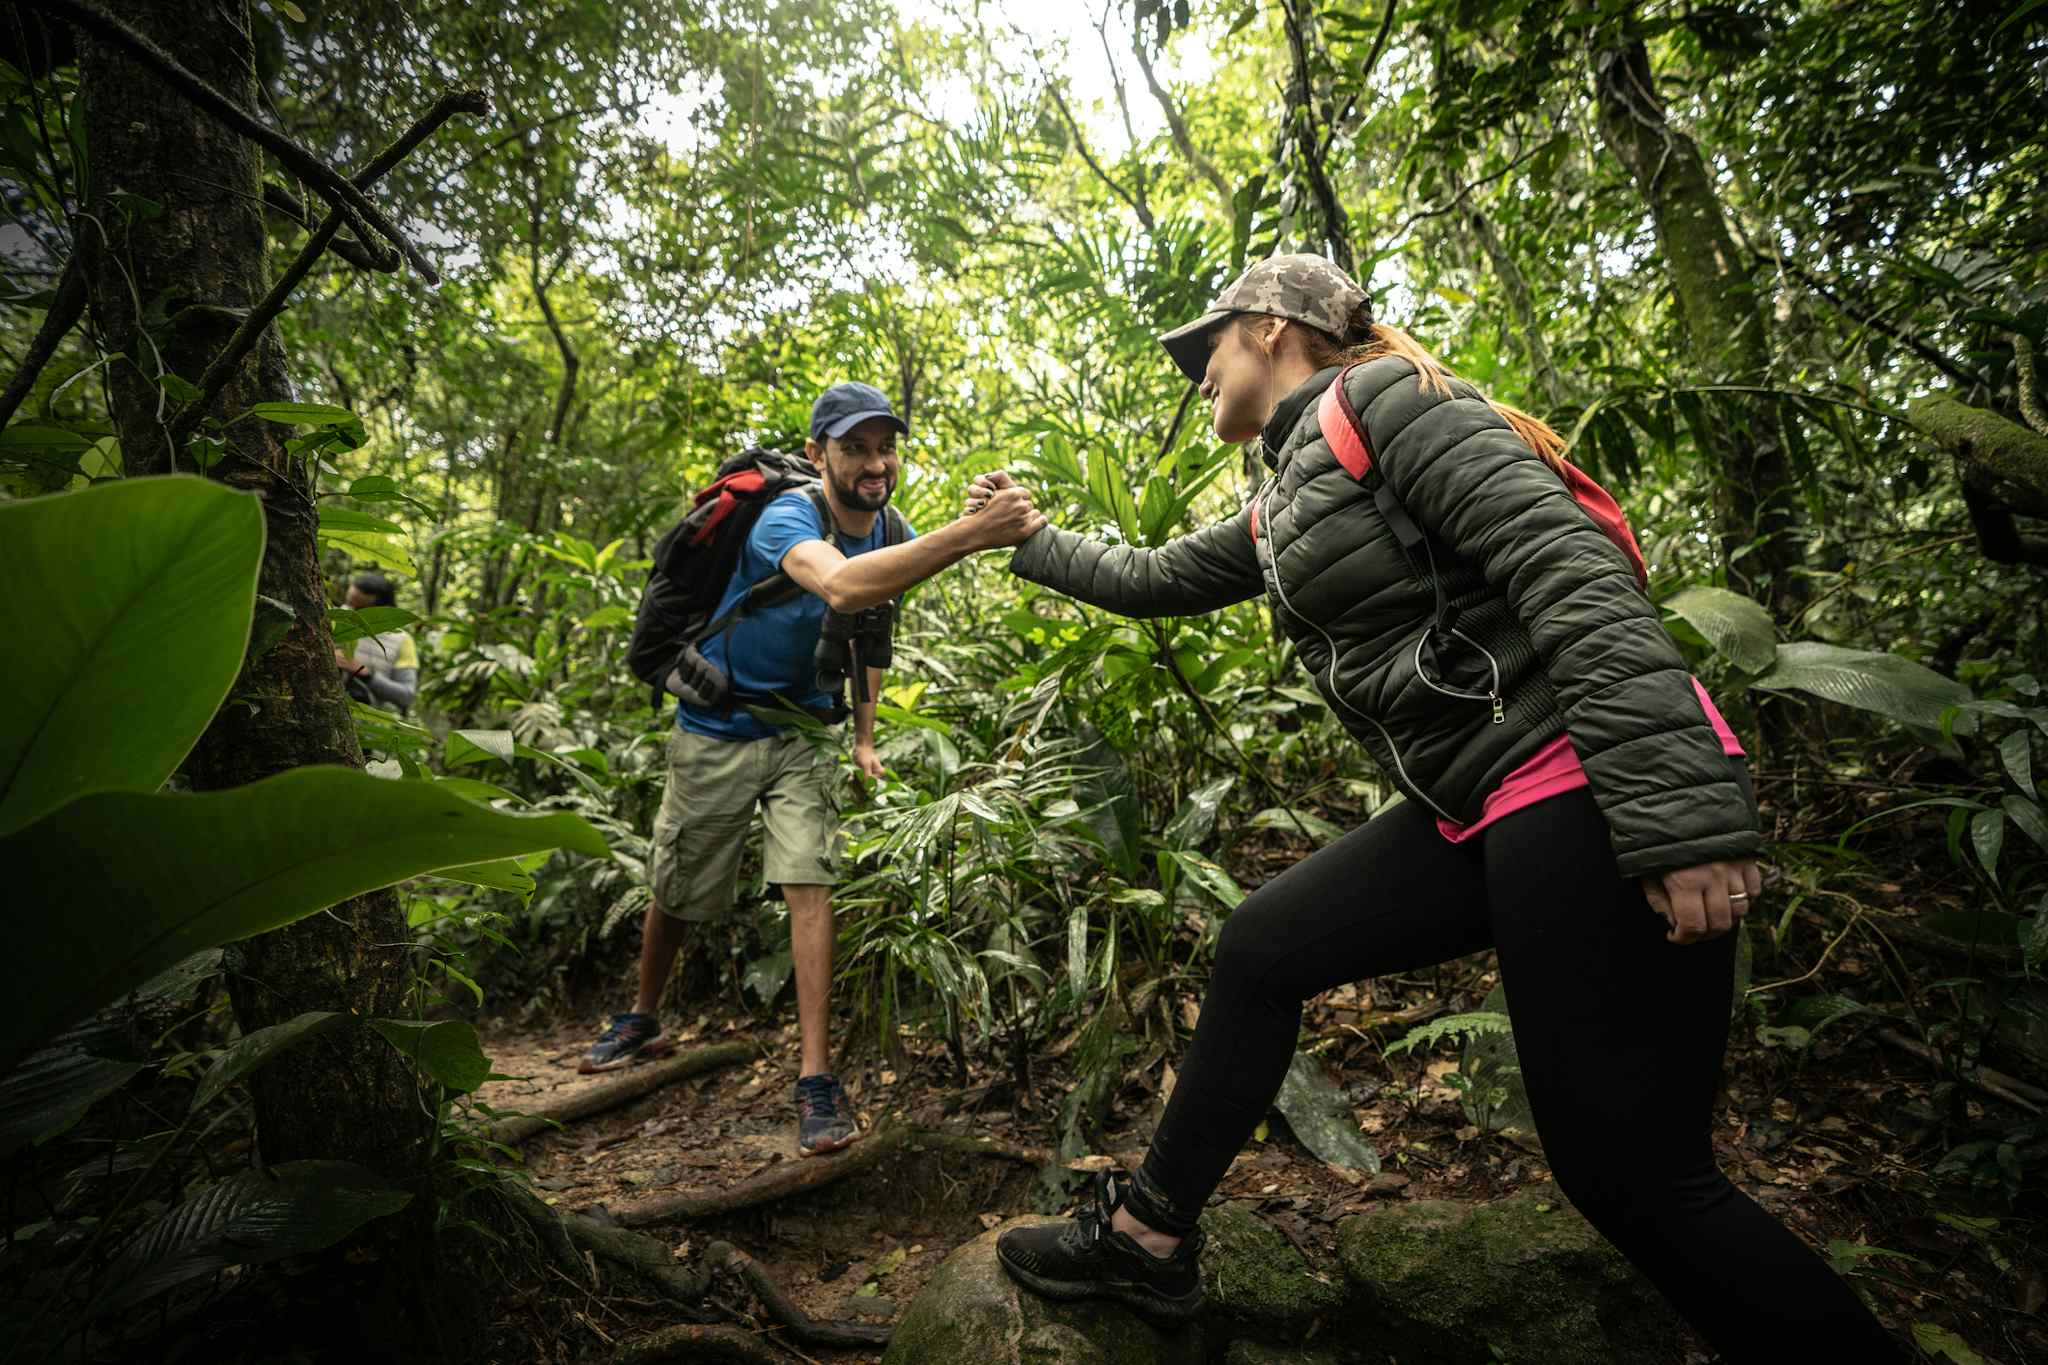 Hikers on a trail in Costa Rica.